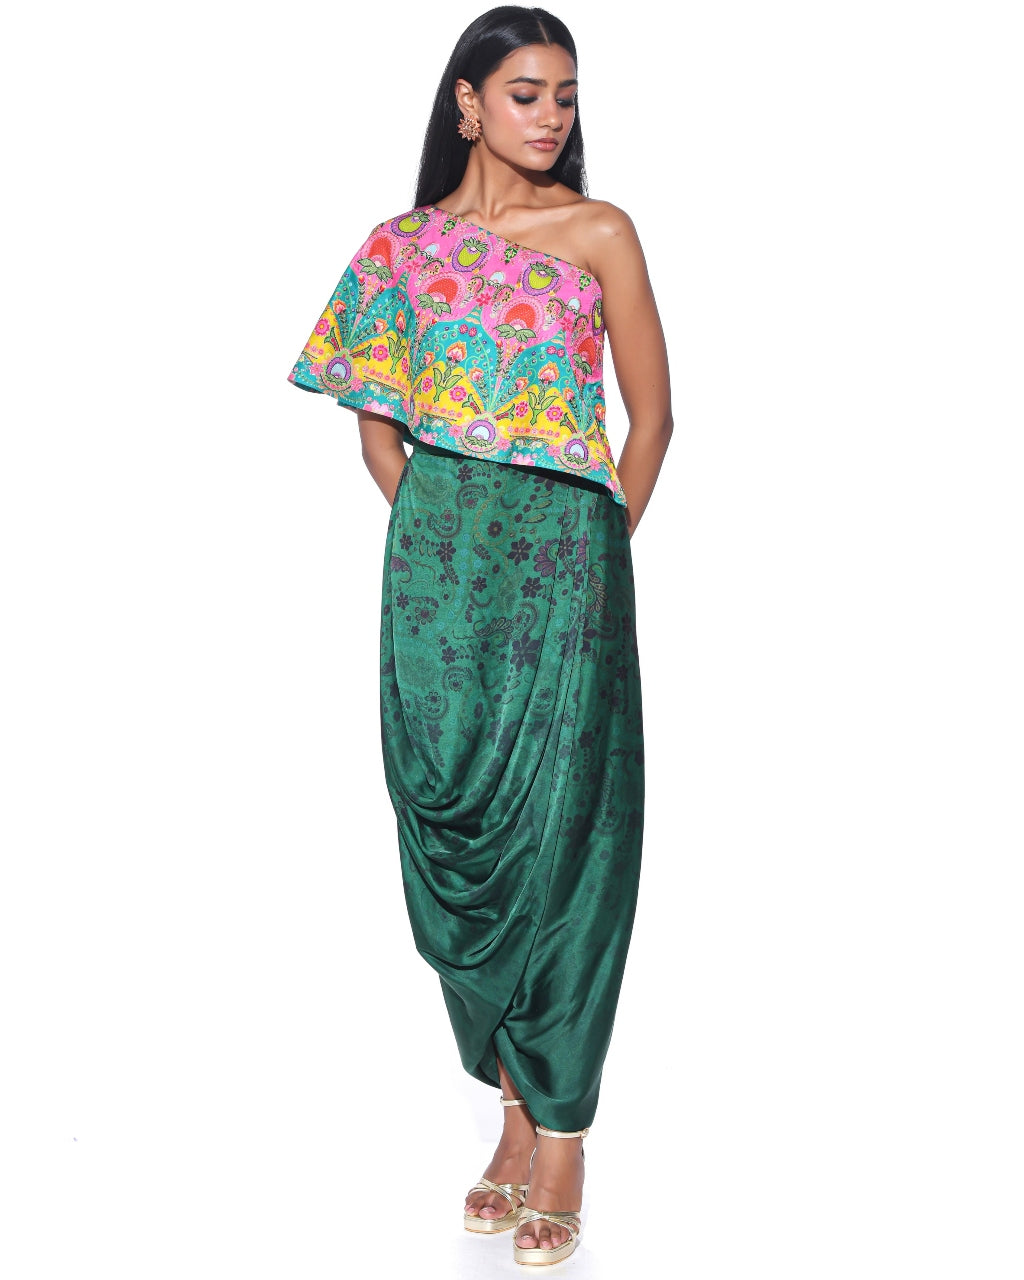 Pink And Teal Embroidered One Shoulder Top And Drape Skirt Set